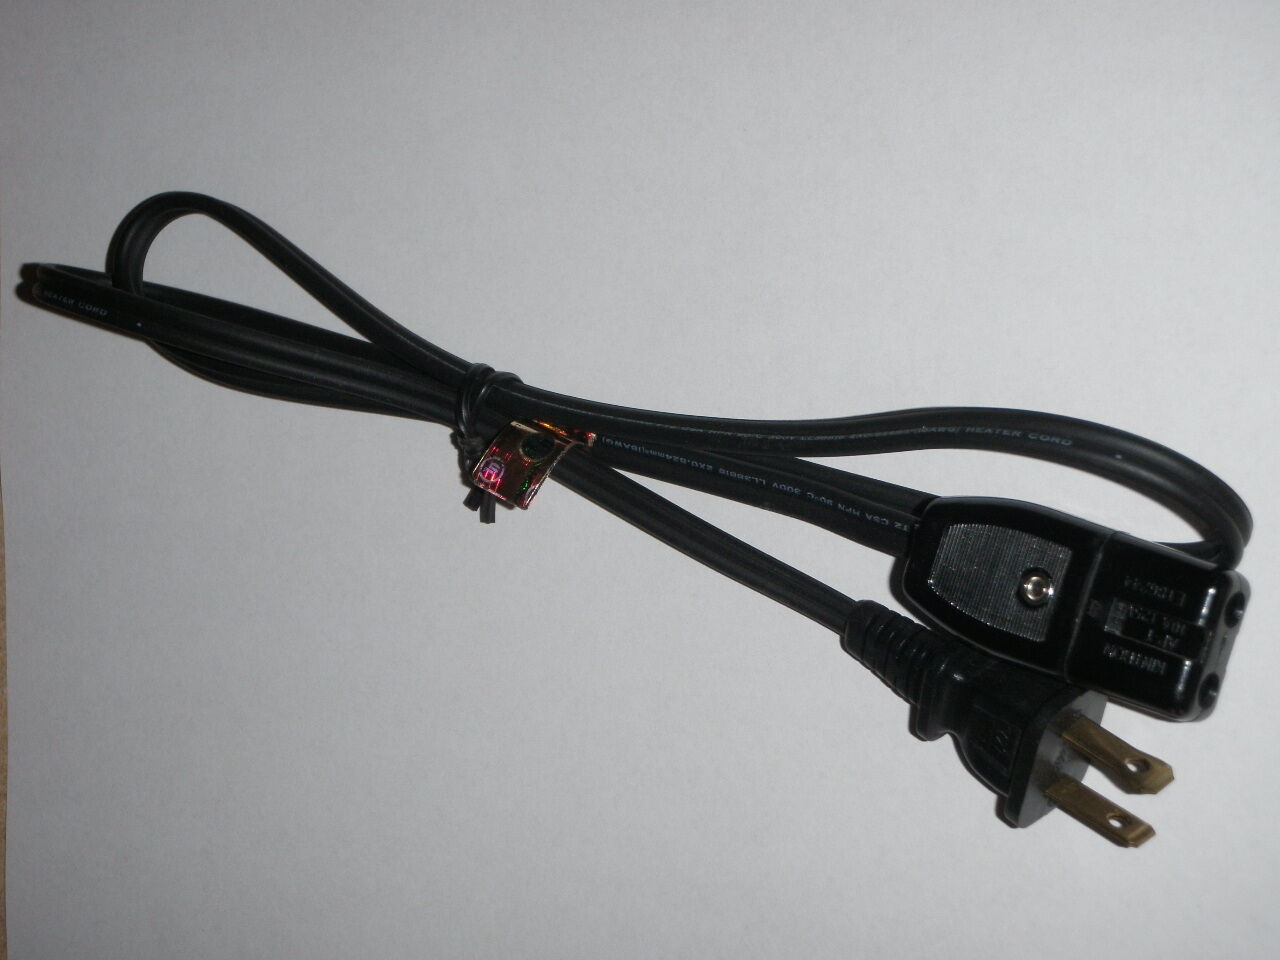 2pin Power Cord for Dominion Toaster Oven Broiler Model 2530 (Ch